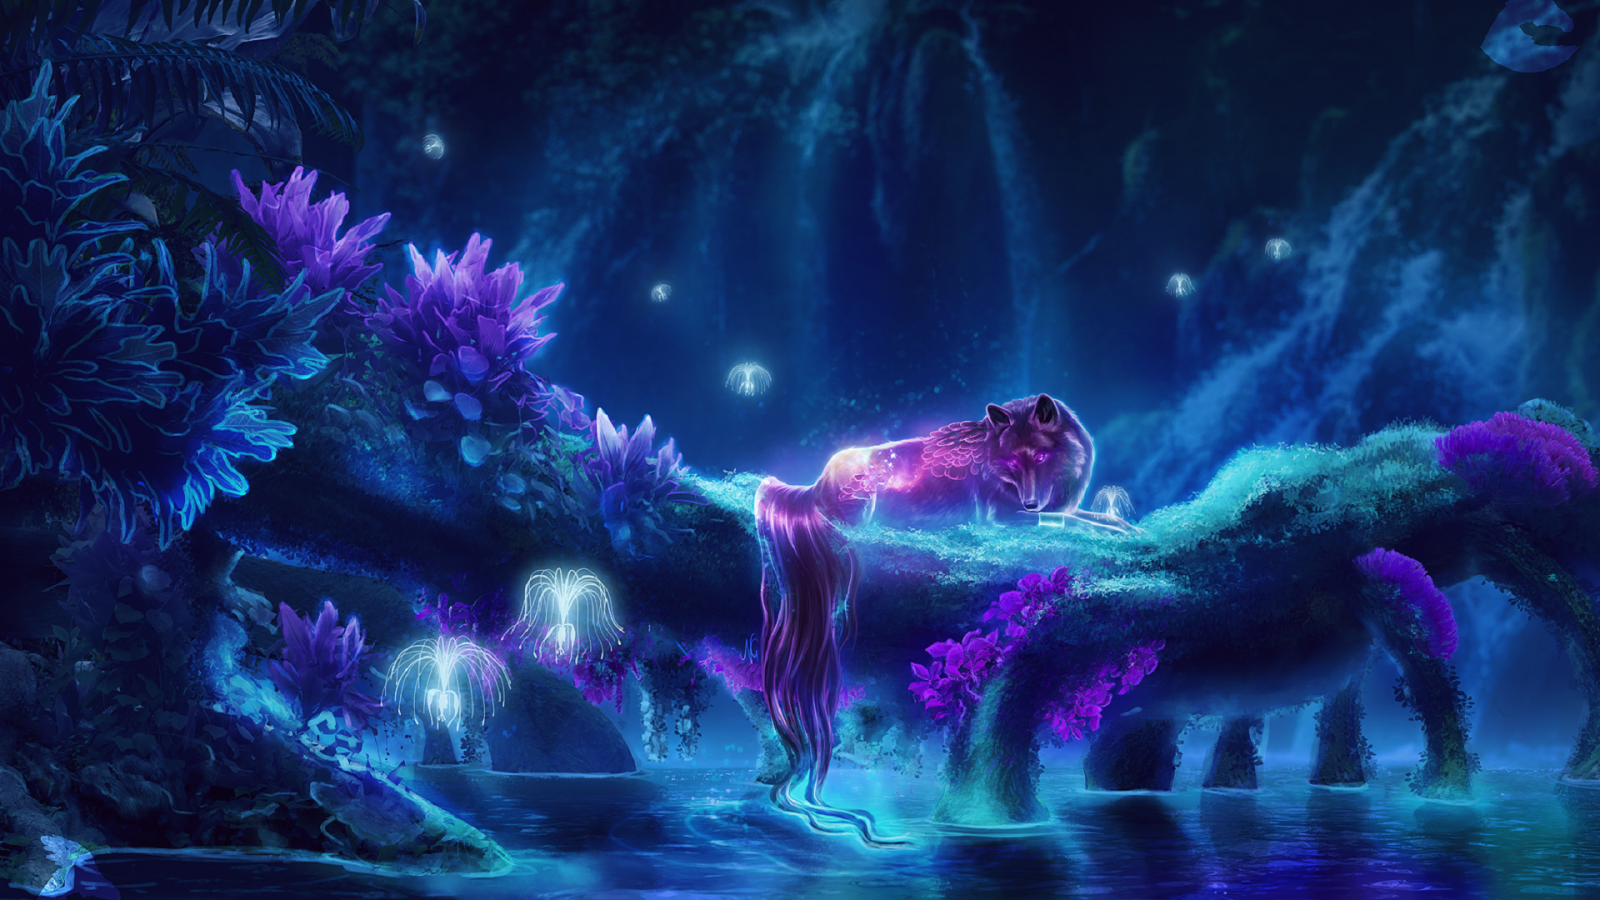 Download 1600x900 Fantasy Creature, Wolf, Forest, Water, Magical Creatures, Night Wallpaper